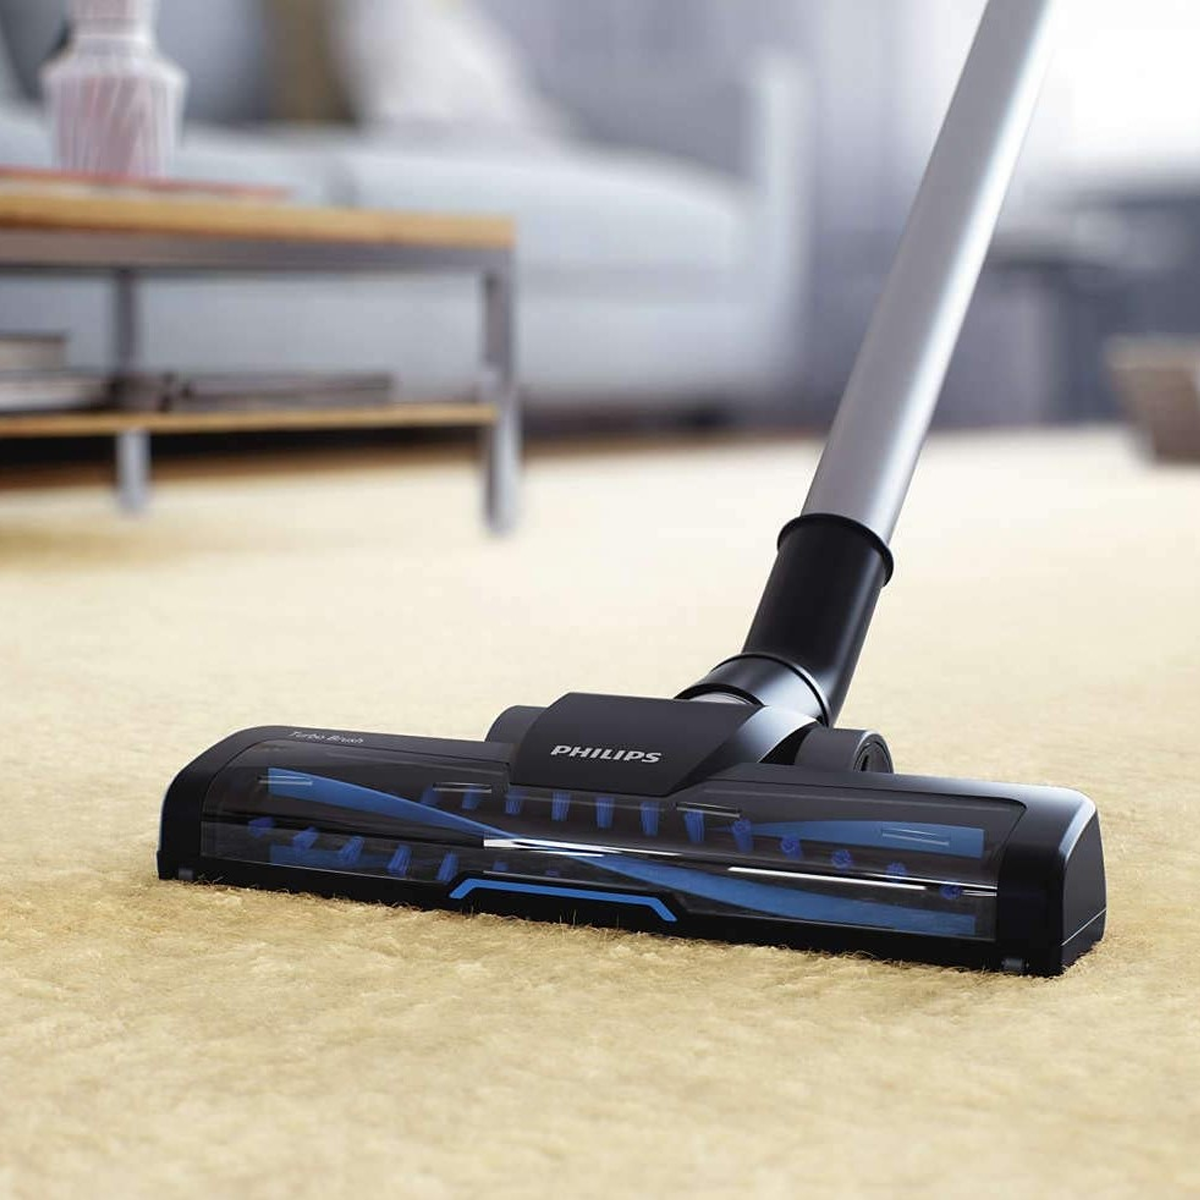 Philips Bagged Vacuum Cleaner 2000W